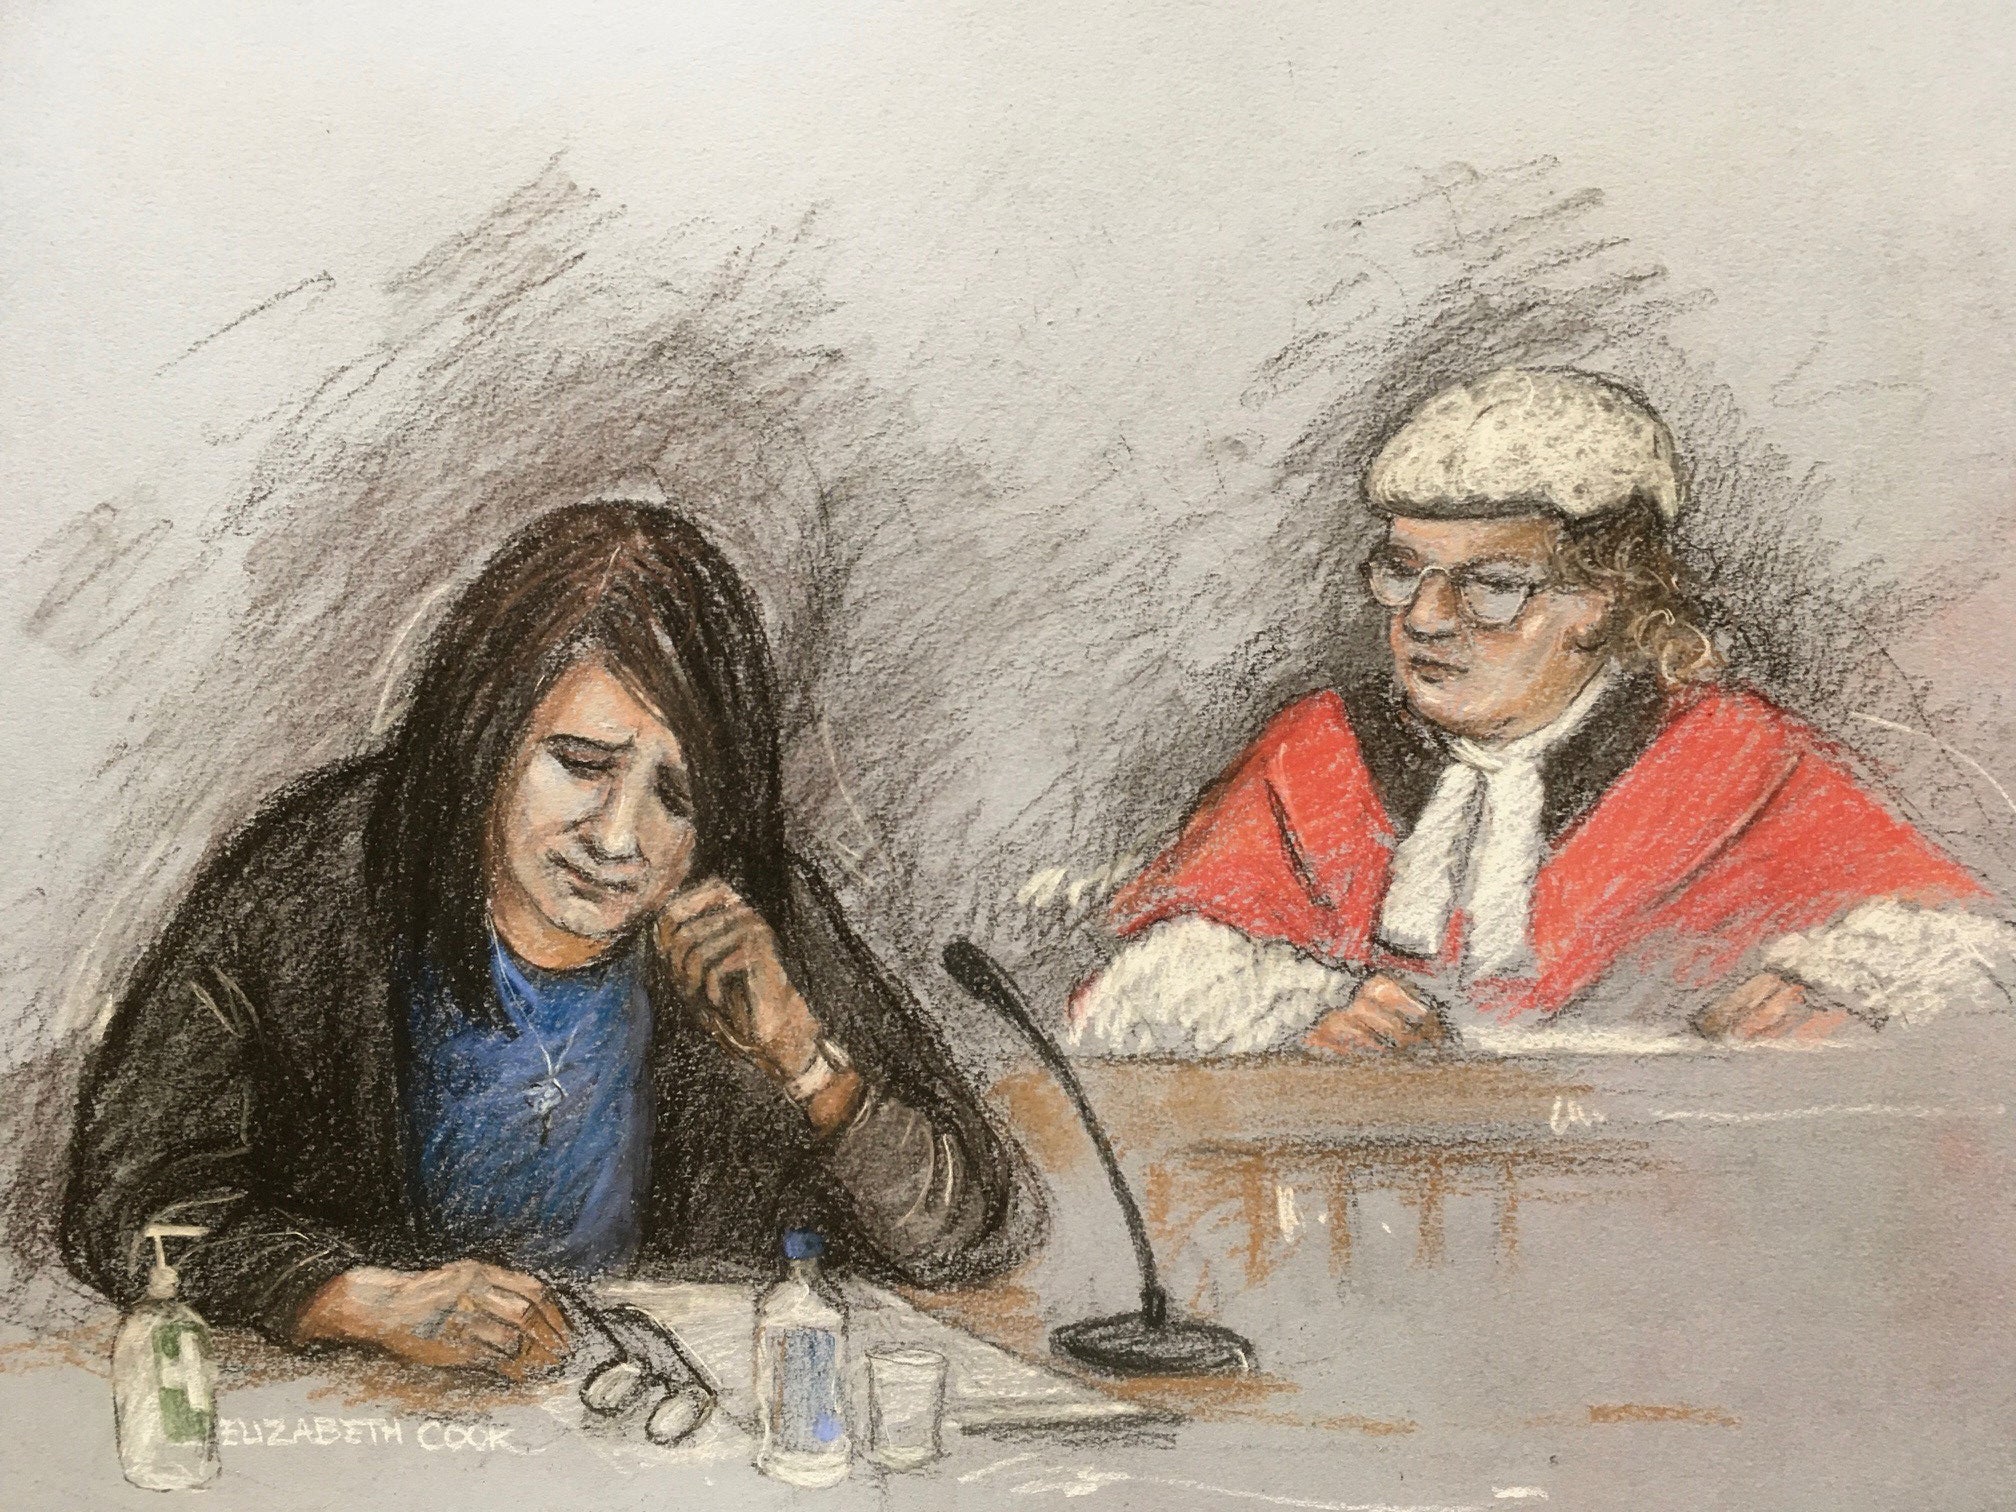 Williamson told the court her partner John Cole had threatened to kill Logan (Elizabeth Cook/PA)